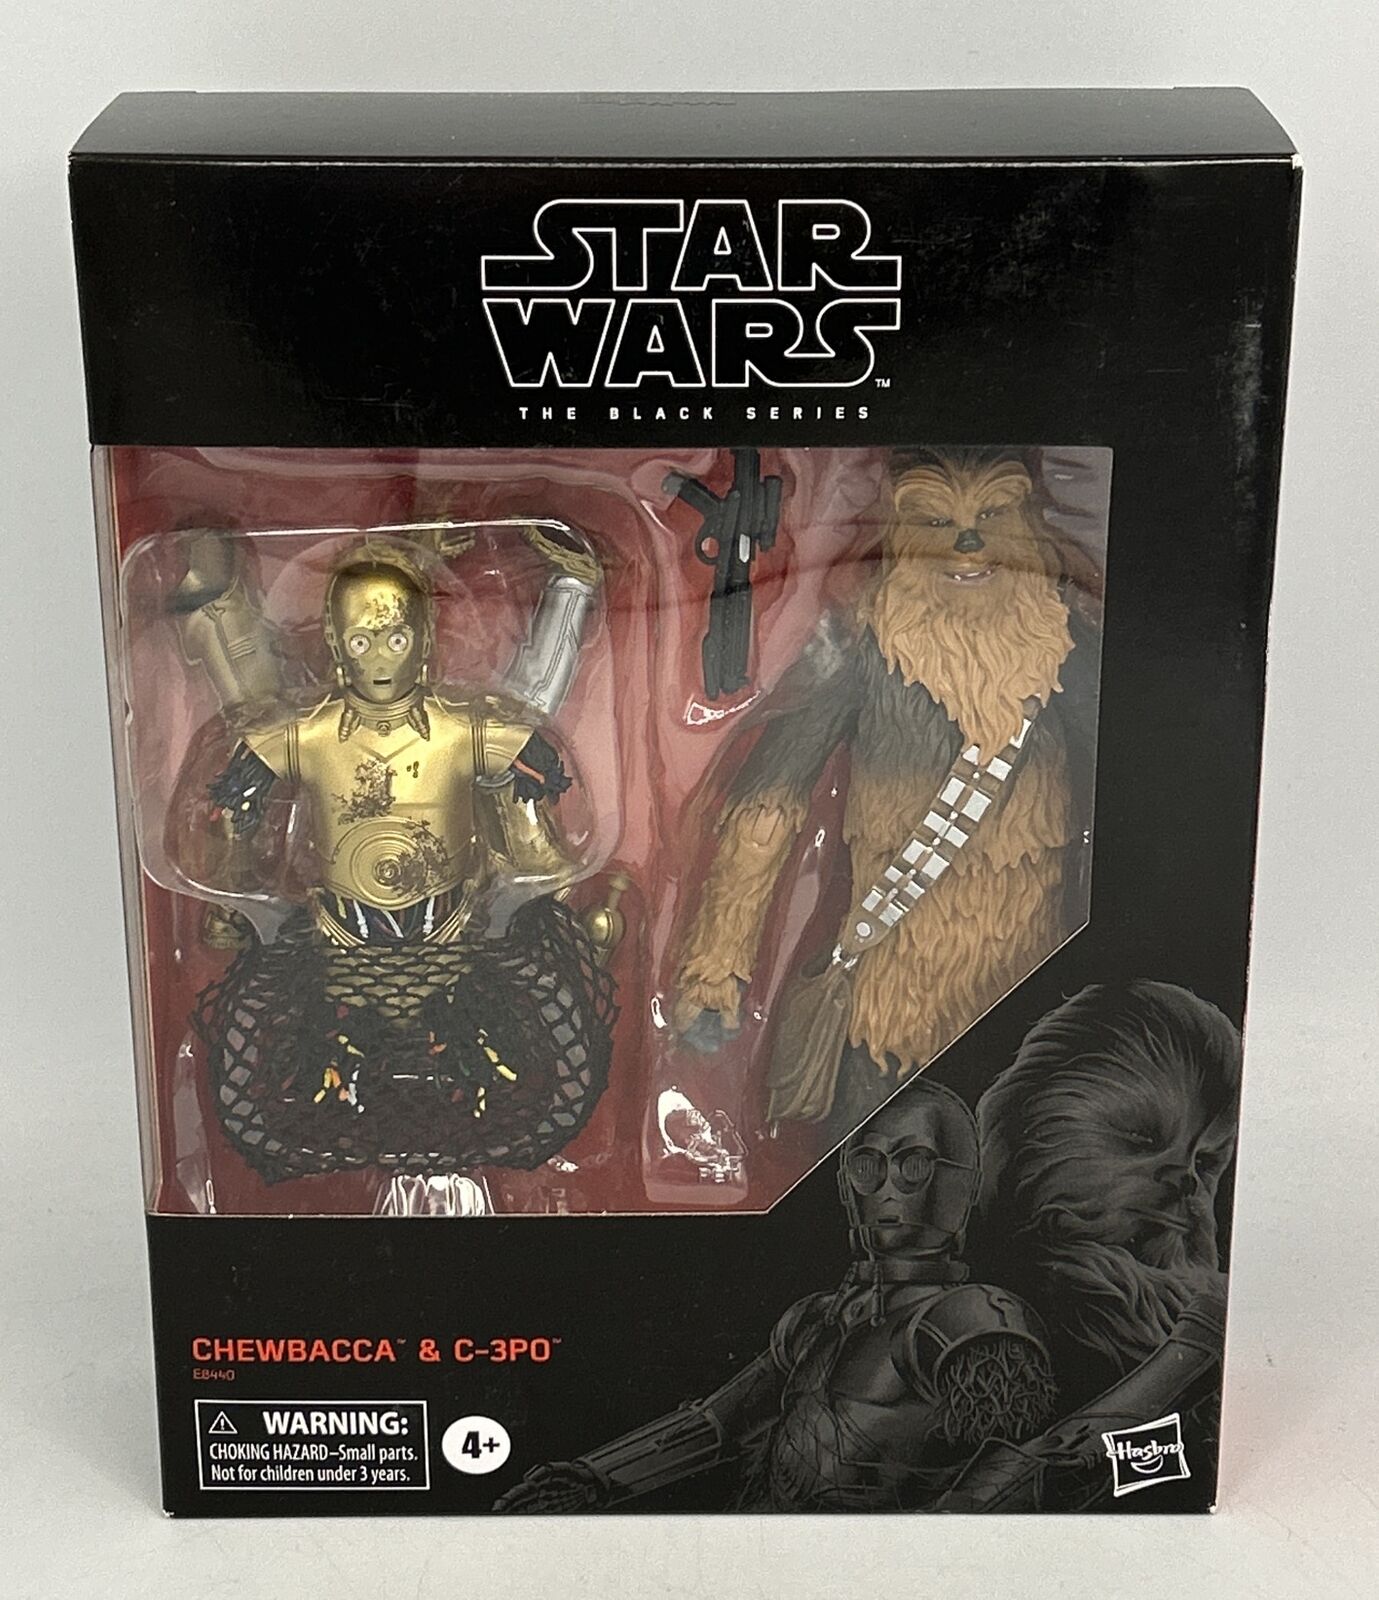 Star Wars The Black Series Chewbacca & C-3PO 6 Inch Action Figures Brand New